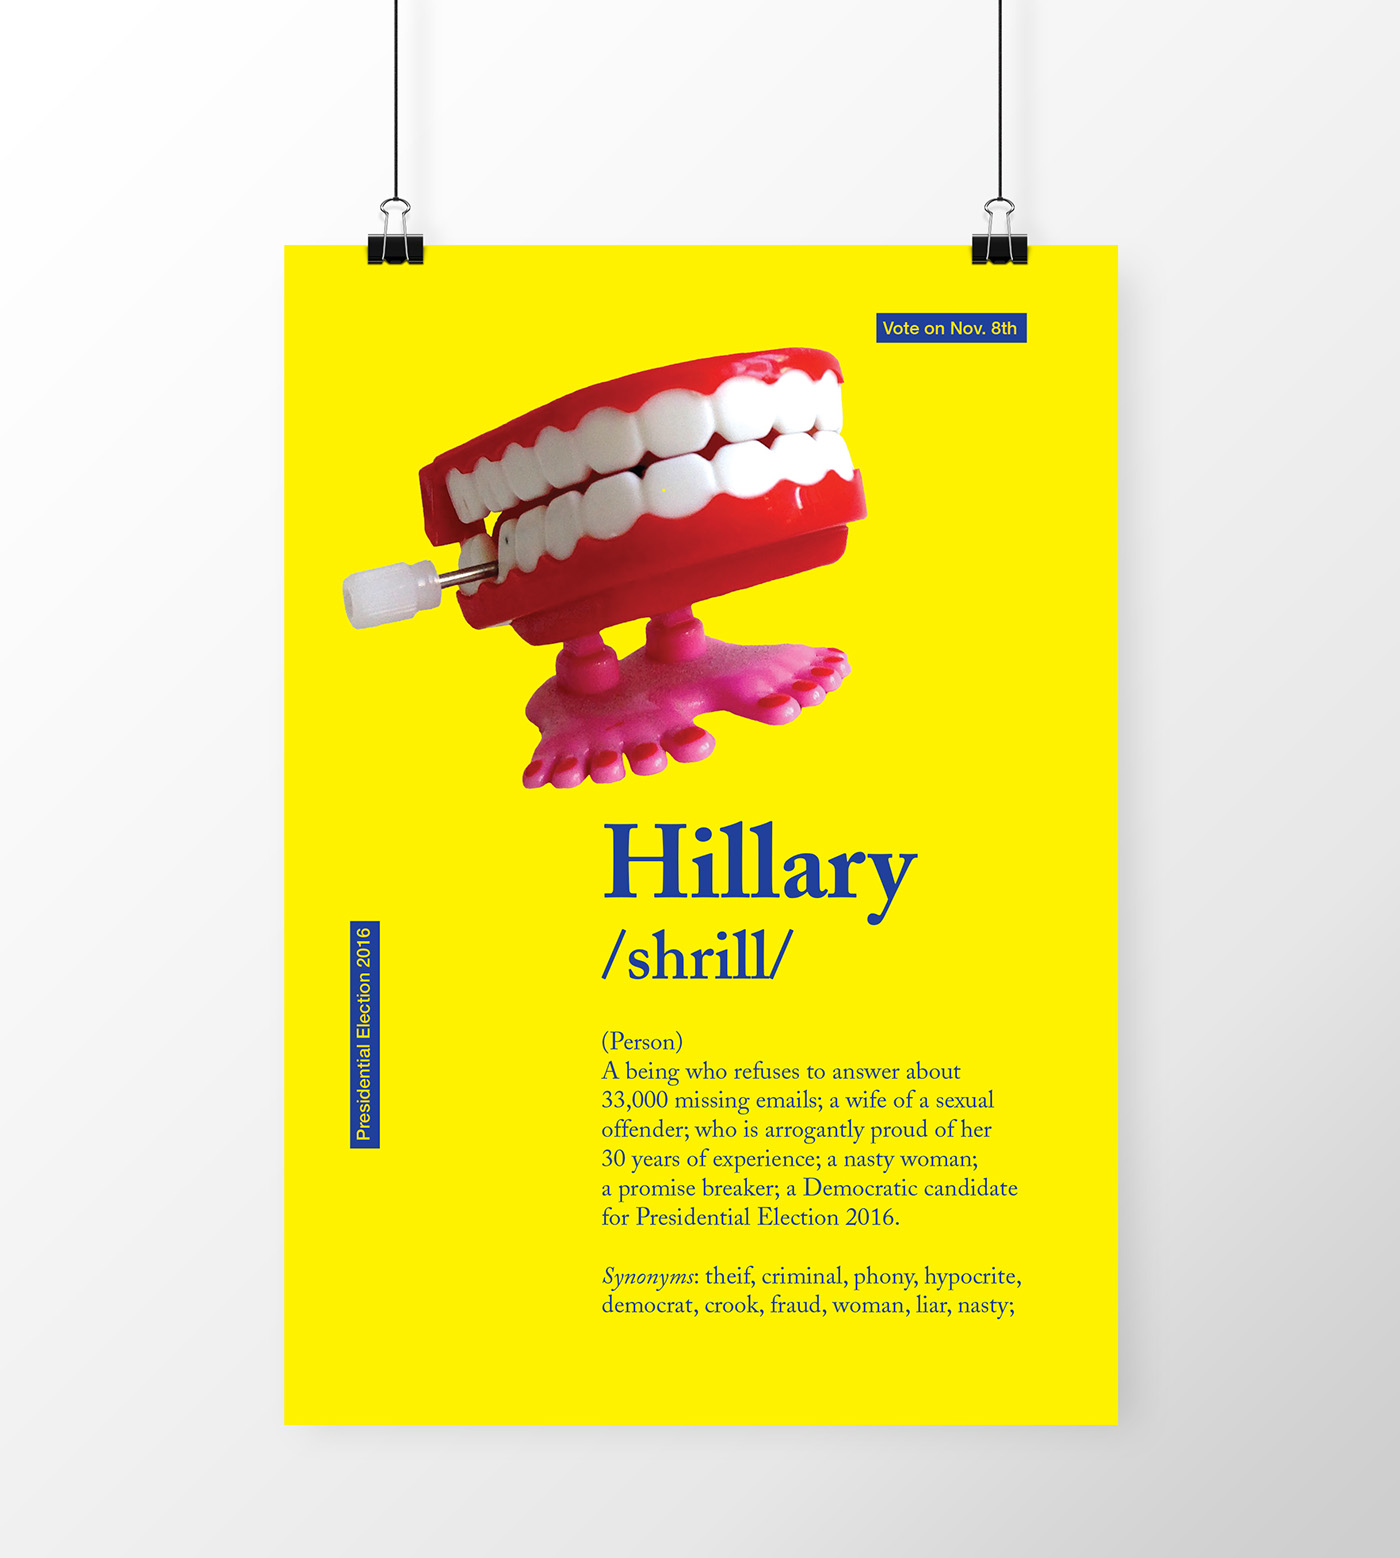 hillary clinton for Against poster campaign Trump donald Election Presidential